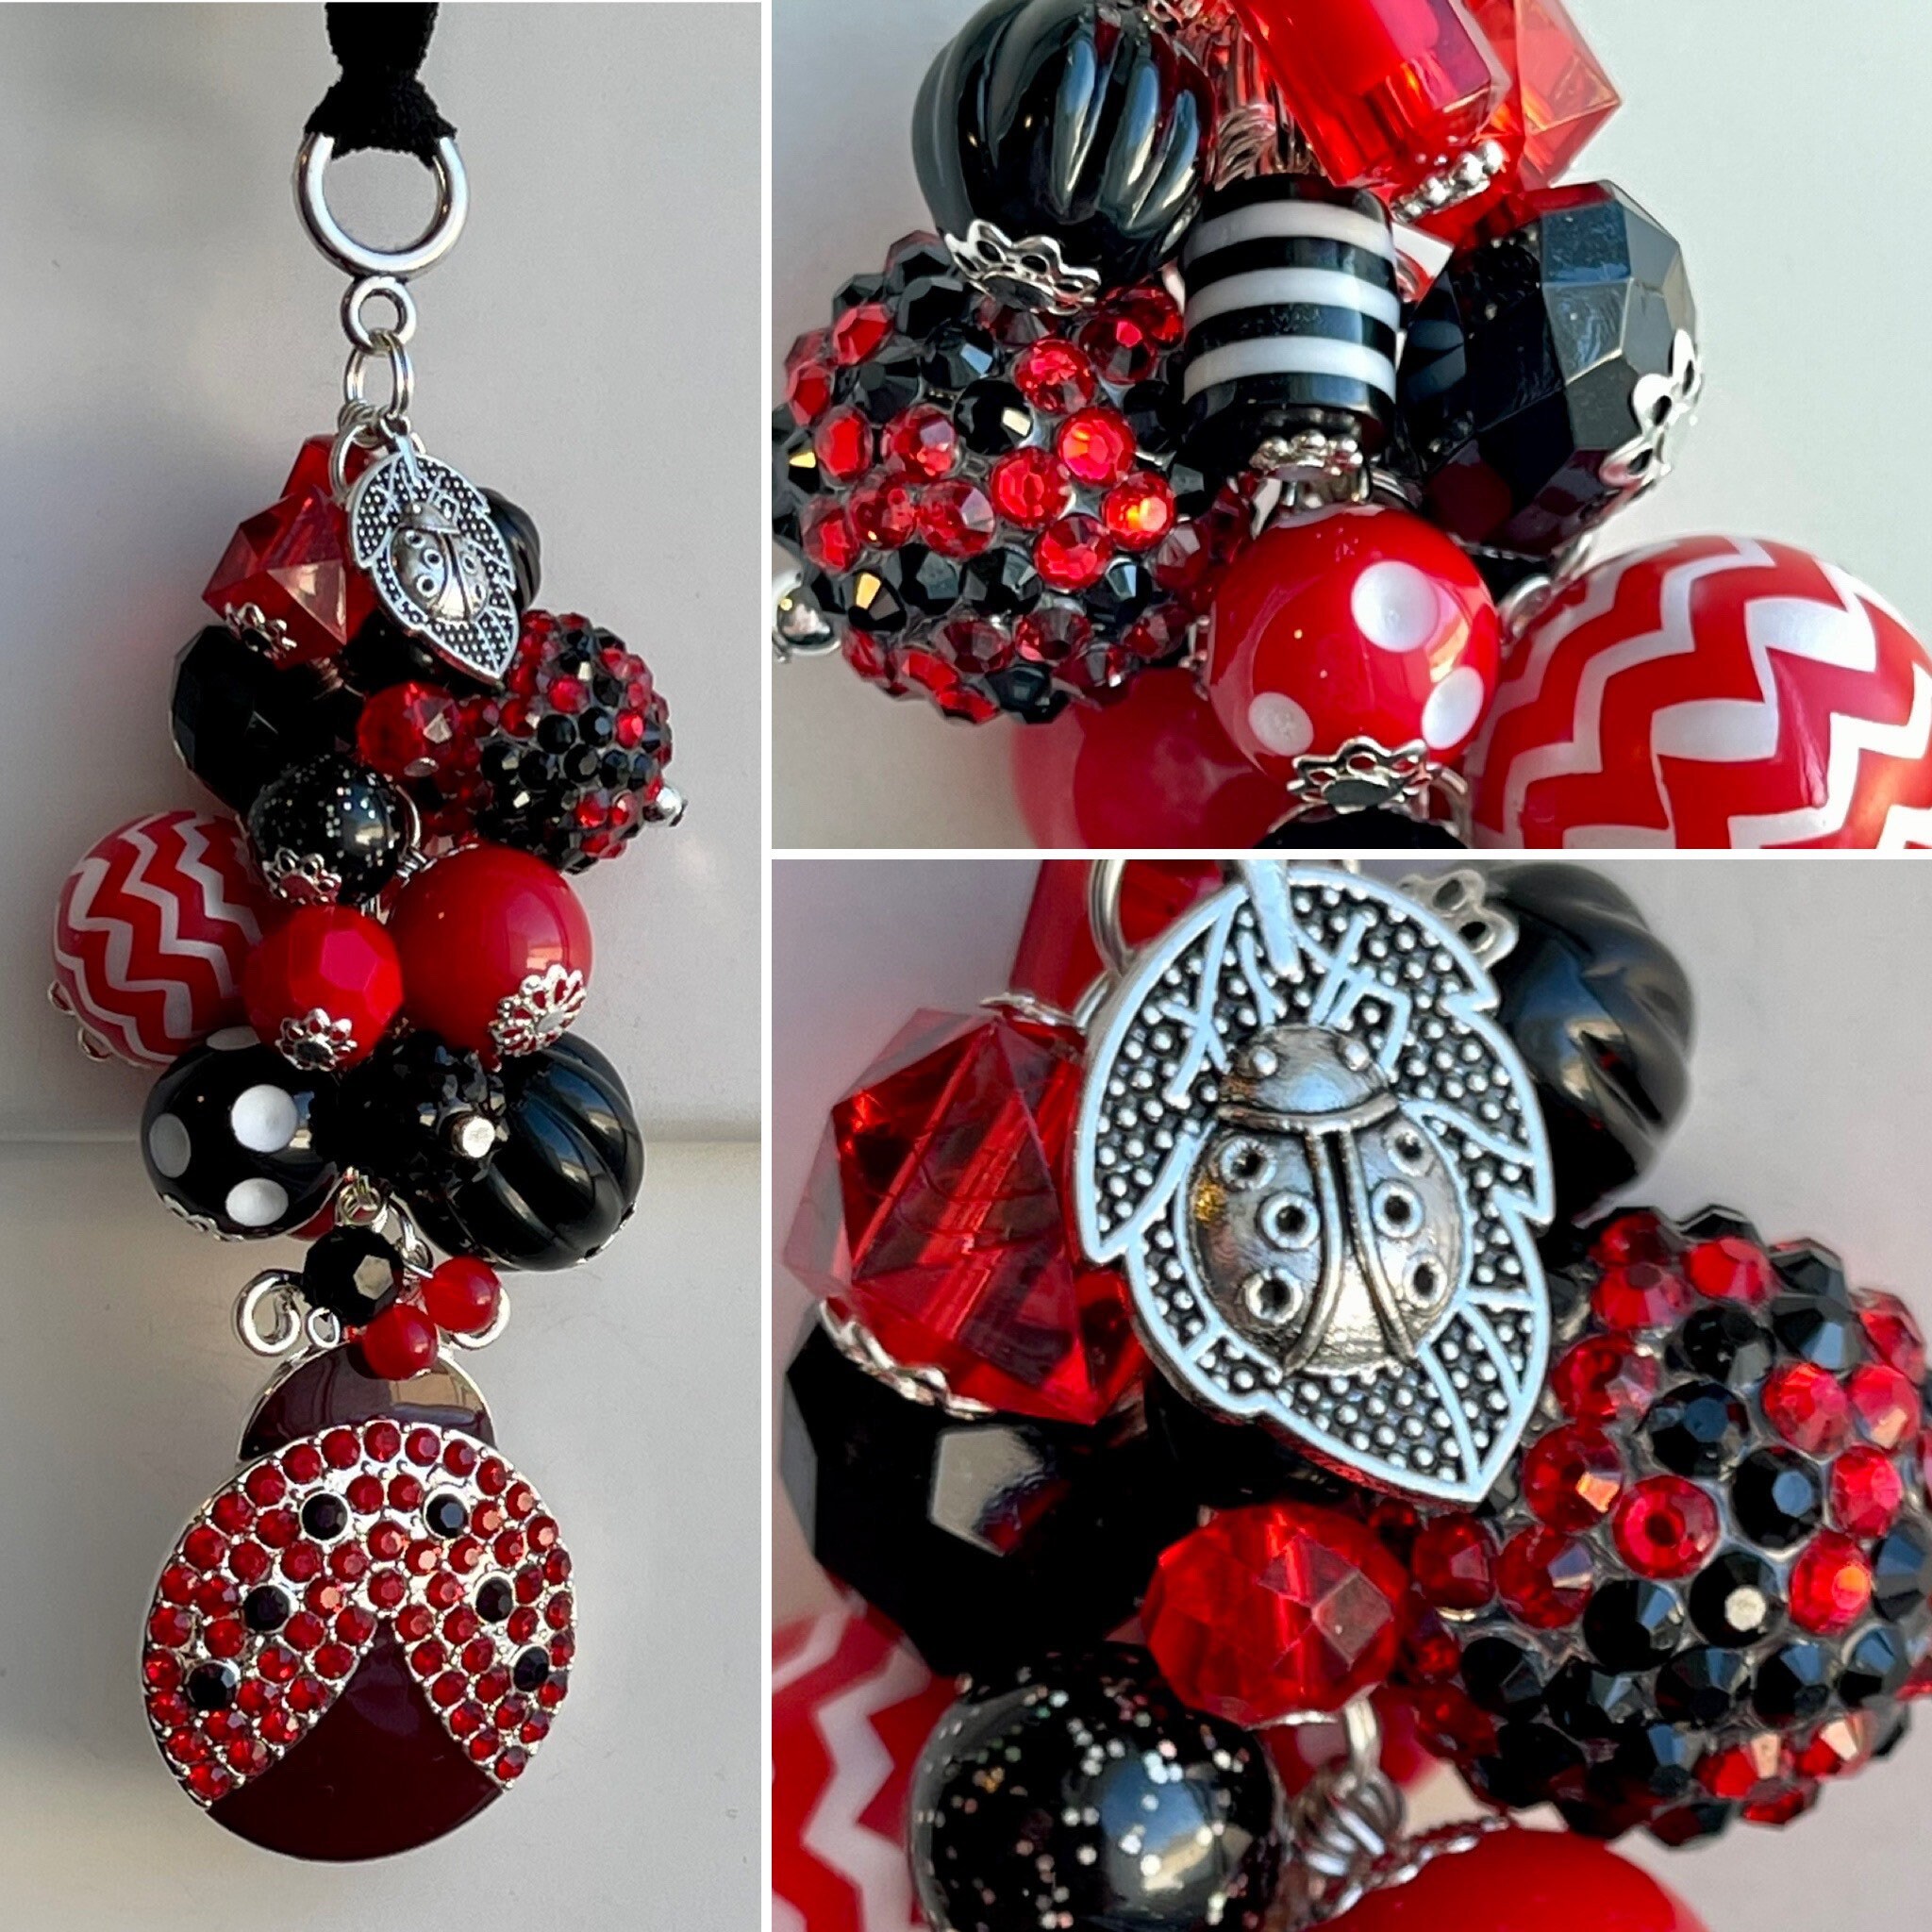 SUNFLOWERS LADY BUGS LUCK CHARM REAR VIEW MIRROR CAR CHARM MOBILE ORNAMENT 